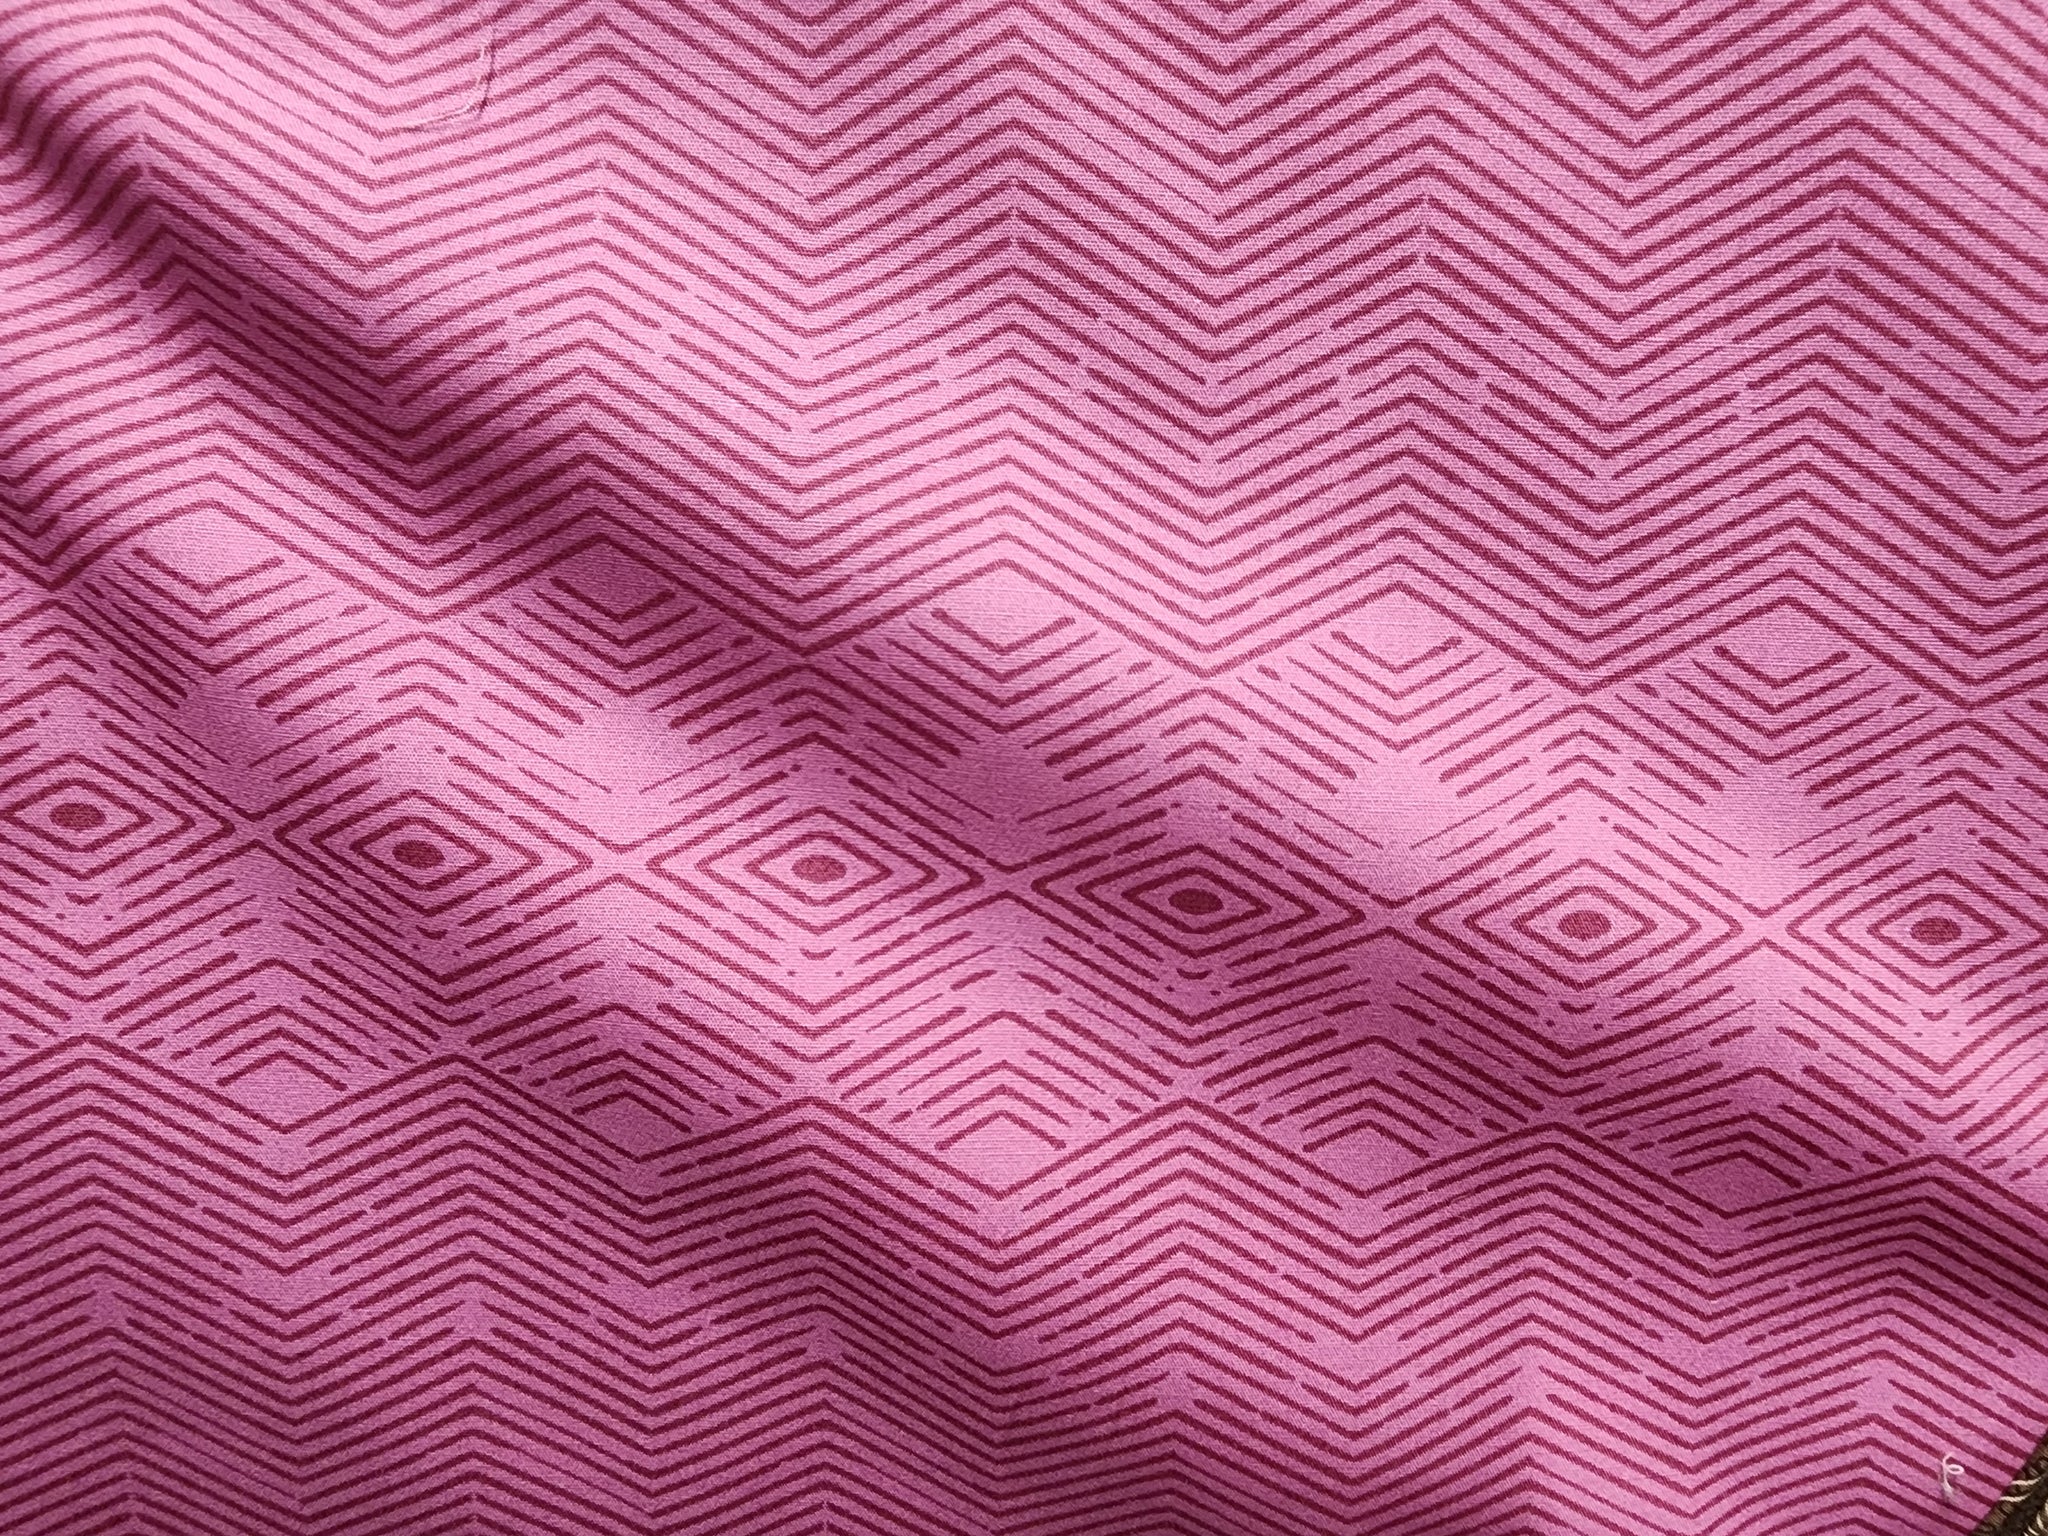 Clearance Weighted Blanket - Queen 20 lb Super Cool Geometric Pink (for 80-120 lb users)